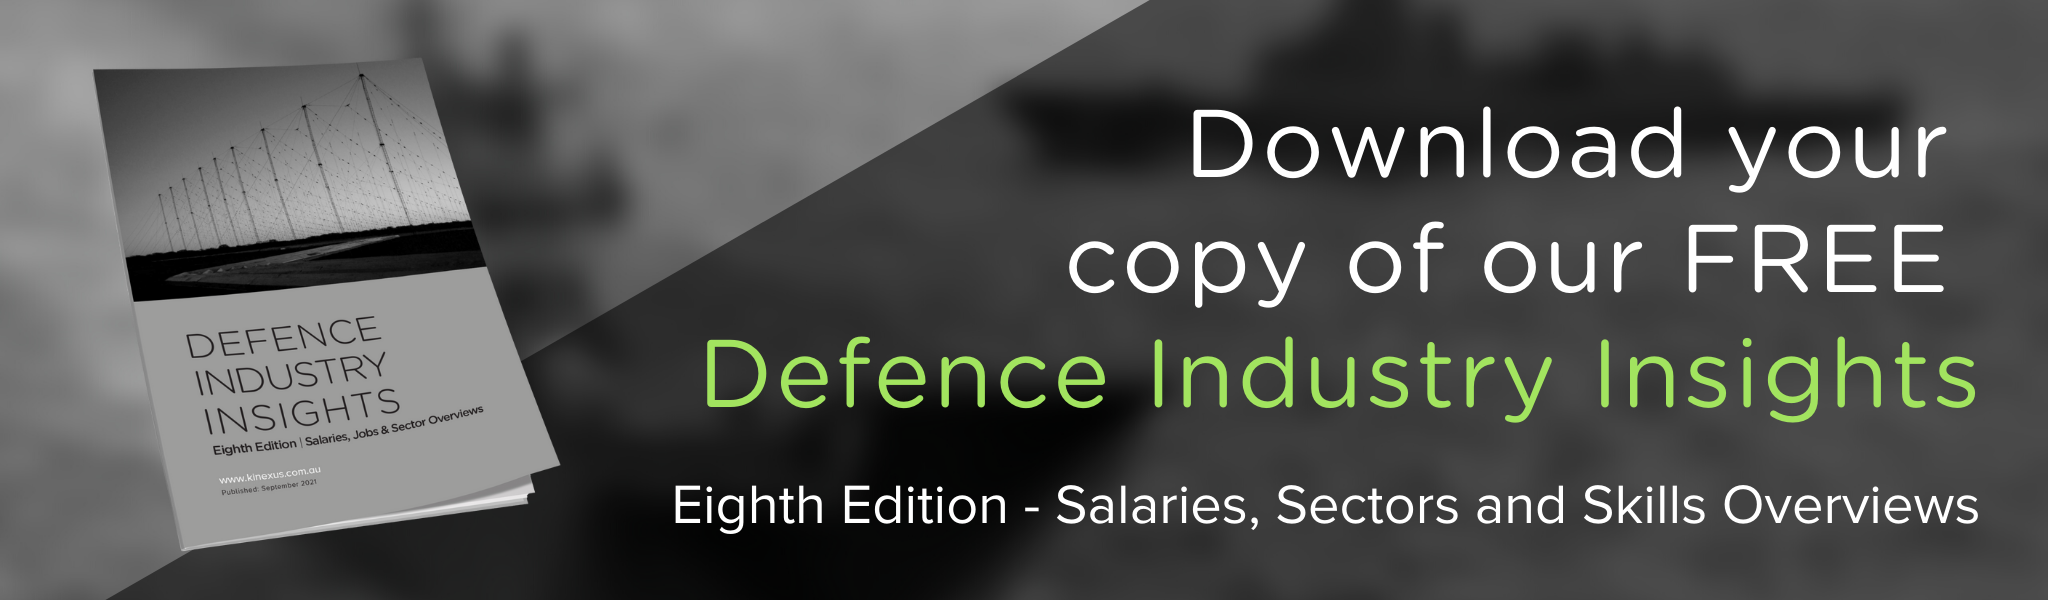 Download Defence Industry Insights Eighth Edition